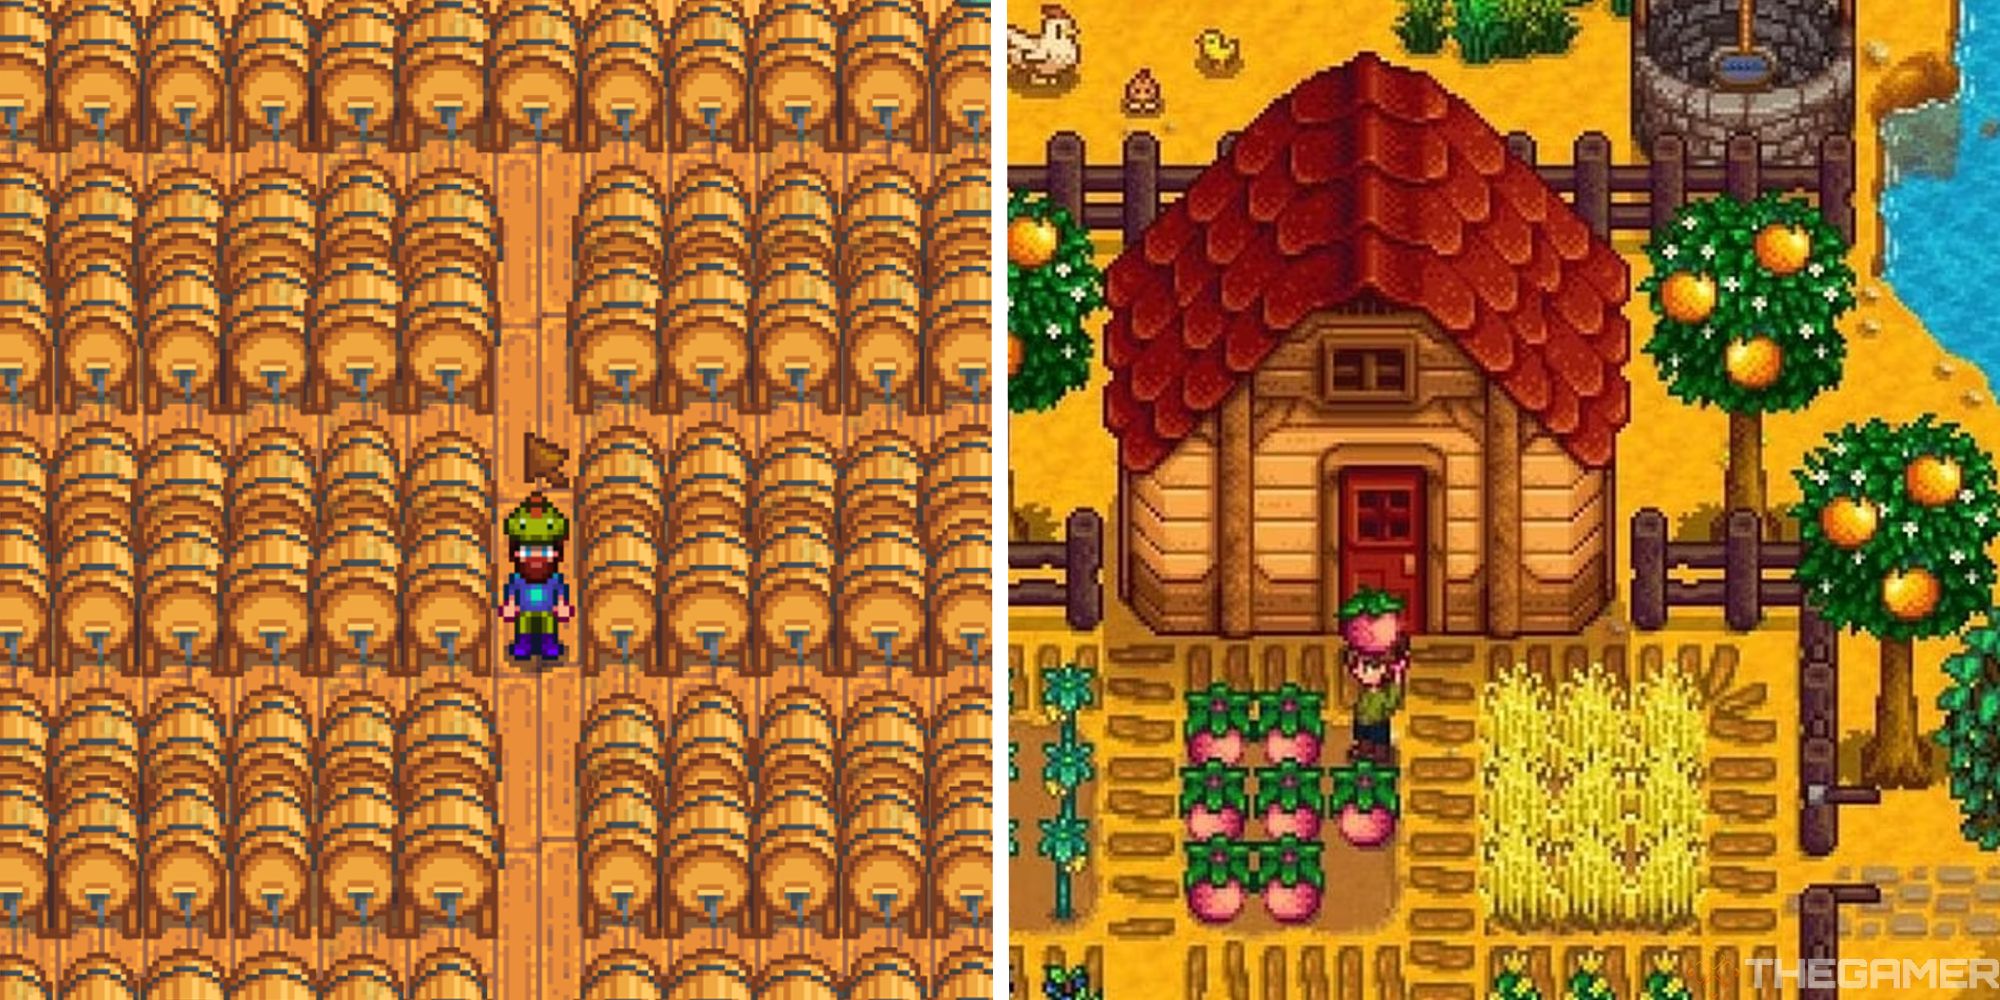 split image with player in keg shed next to image of player outside of shed